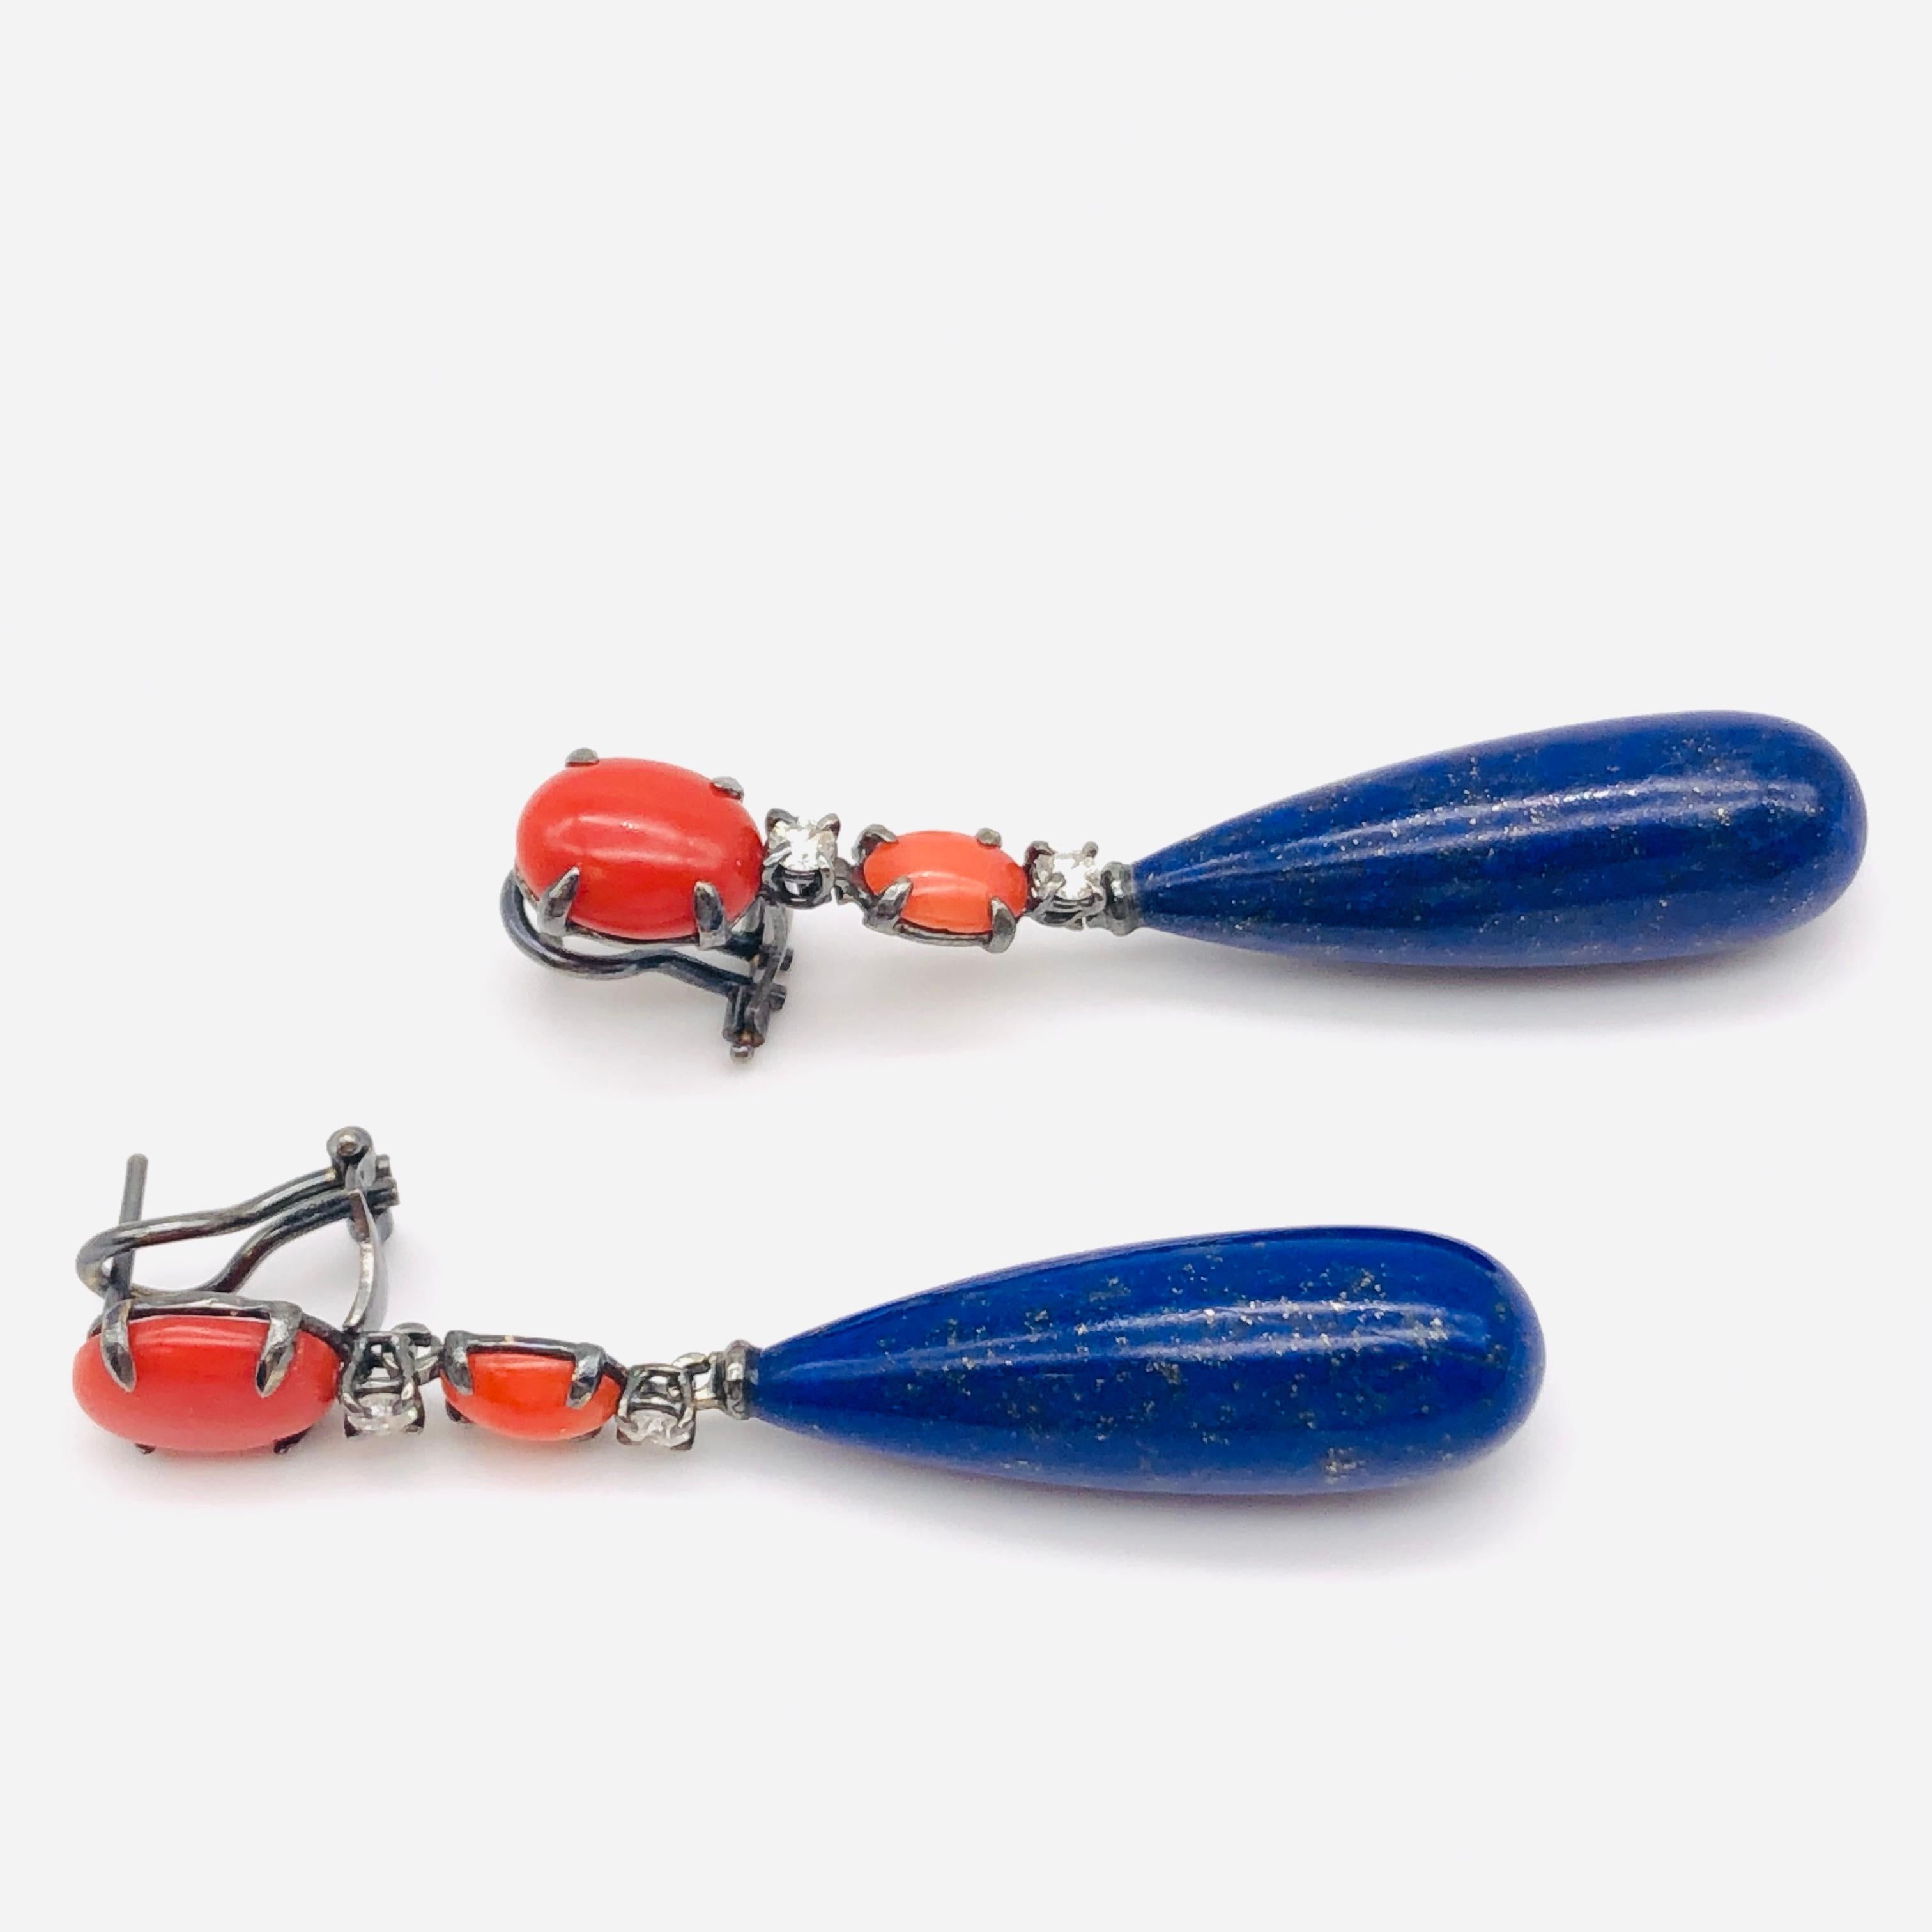 Wonderful Black Gold Coral, Diamonds and Lapis Lazuli Chandelier Earrings.
French Collection by Mesure et Art du Temps.

This ring is in black Gold of 18 Carat.  The Diamonds weight 0,32 Carat. 
There is Coral and Lapis Lazuli, the benefit of the